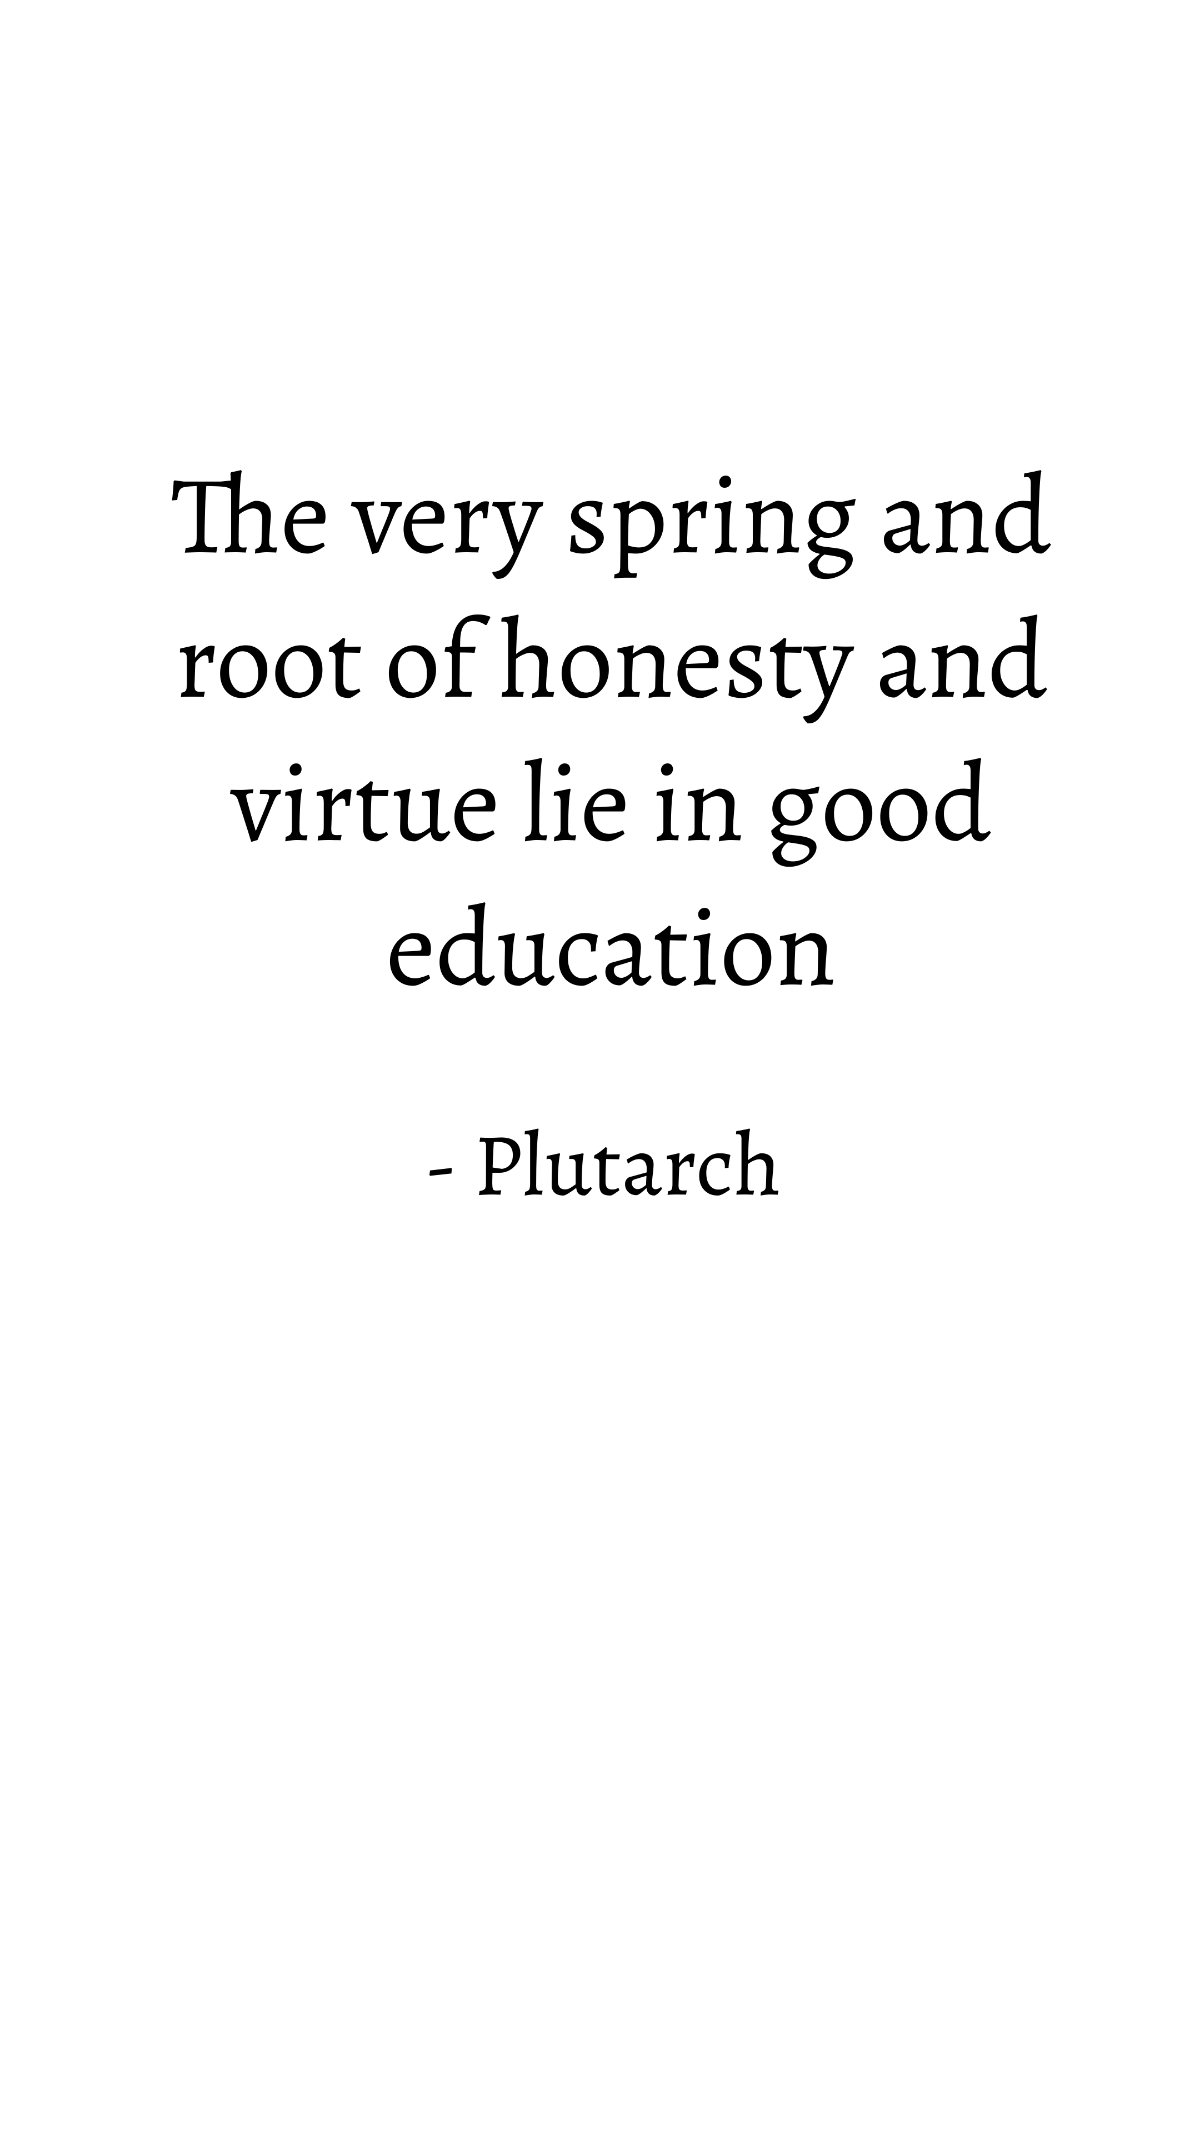 Plutarch - The very spring and root of honesty and virtue lie in good education